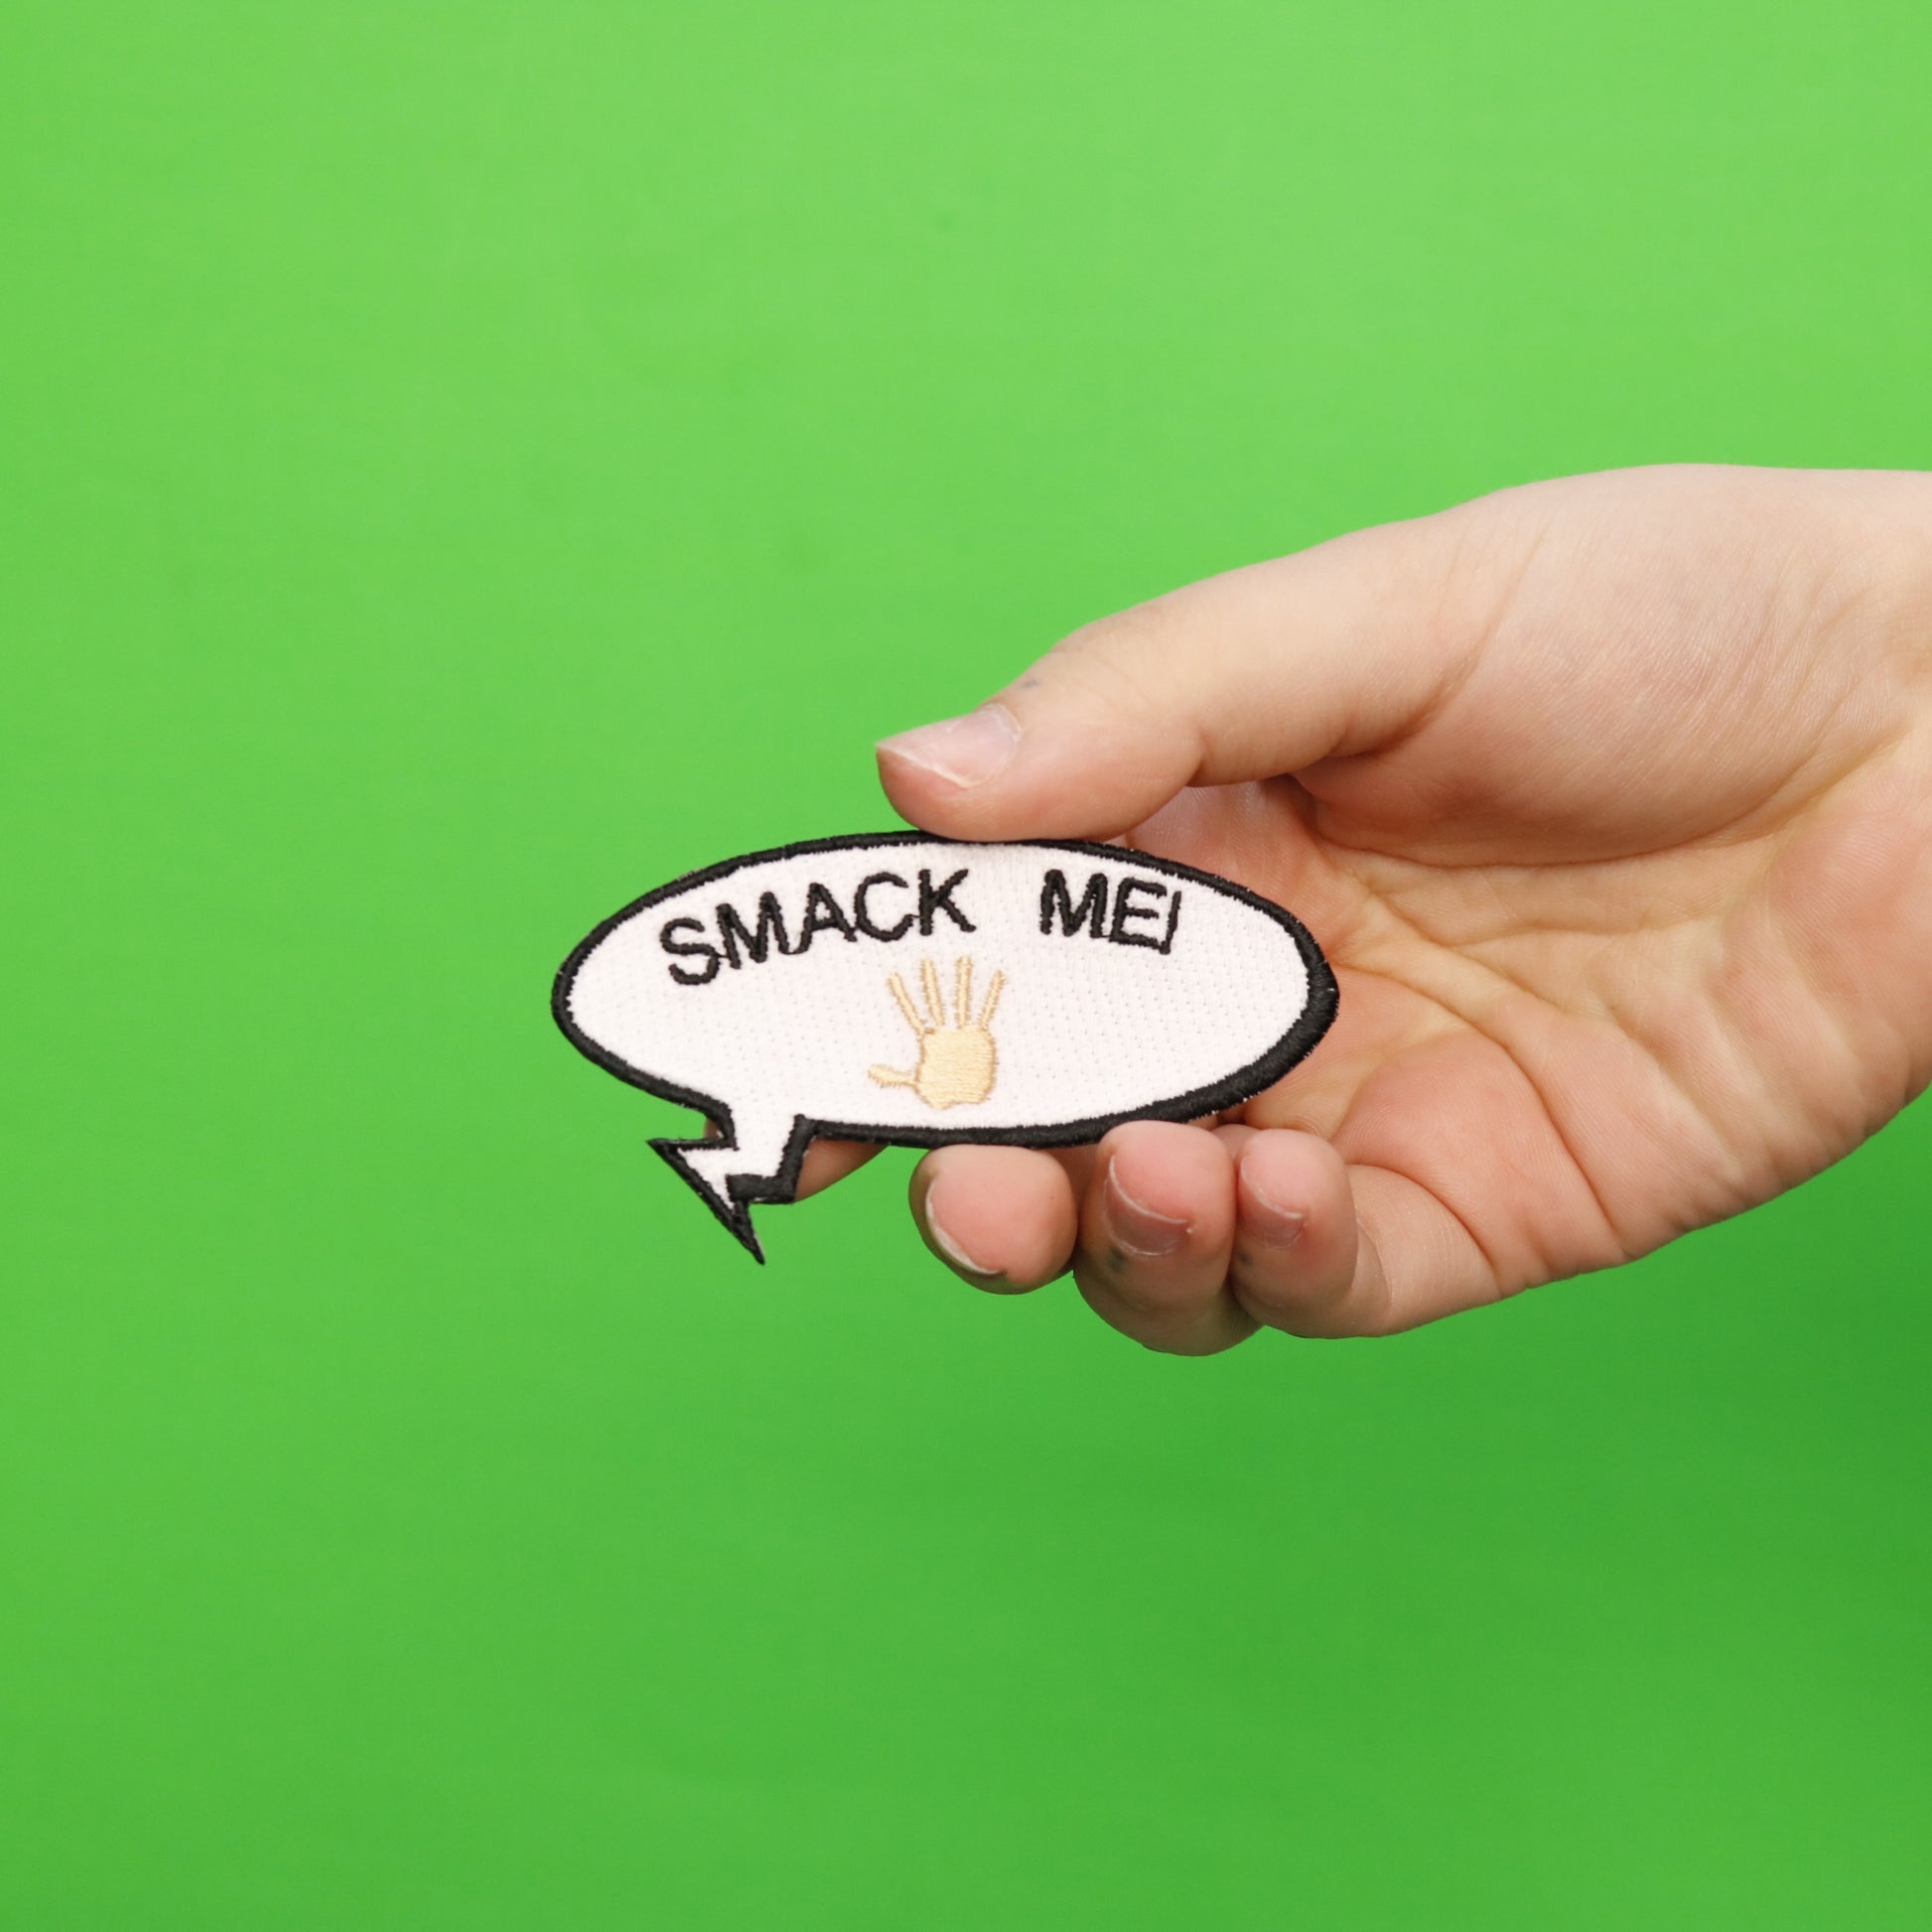 Smack Me Word Bubble Embroidered Iron On Patch 